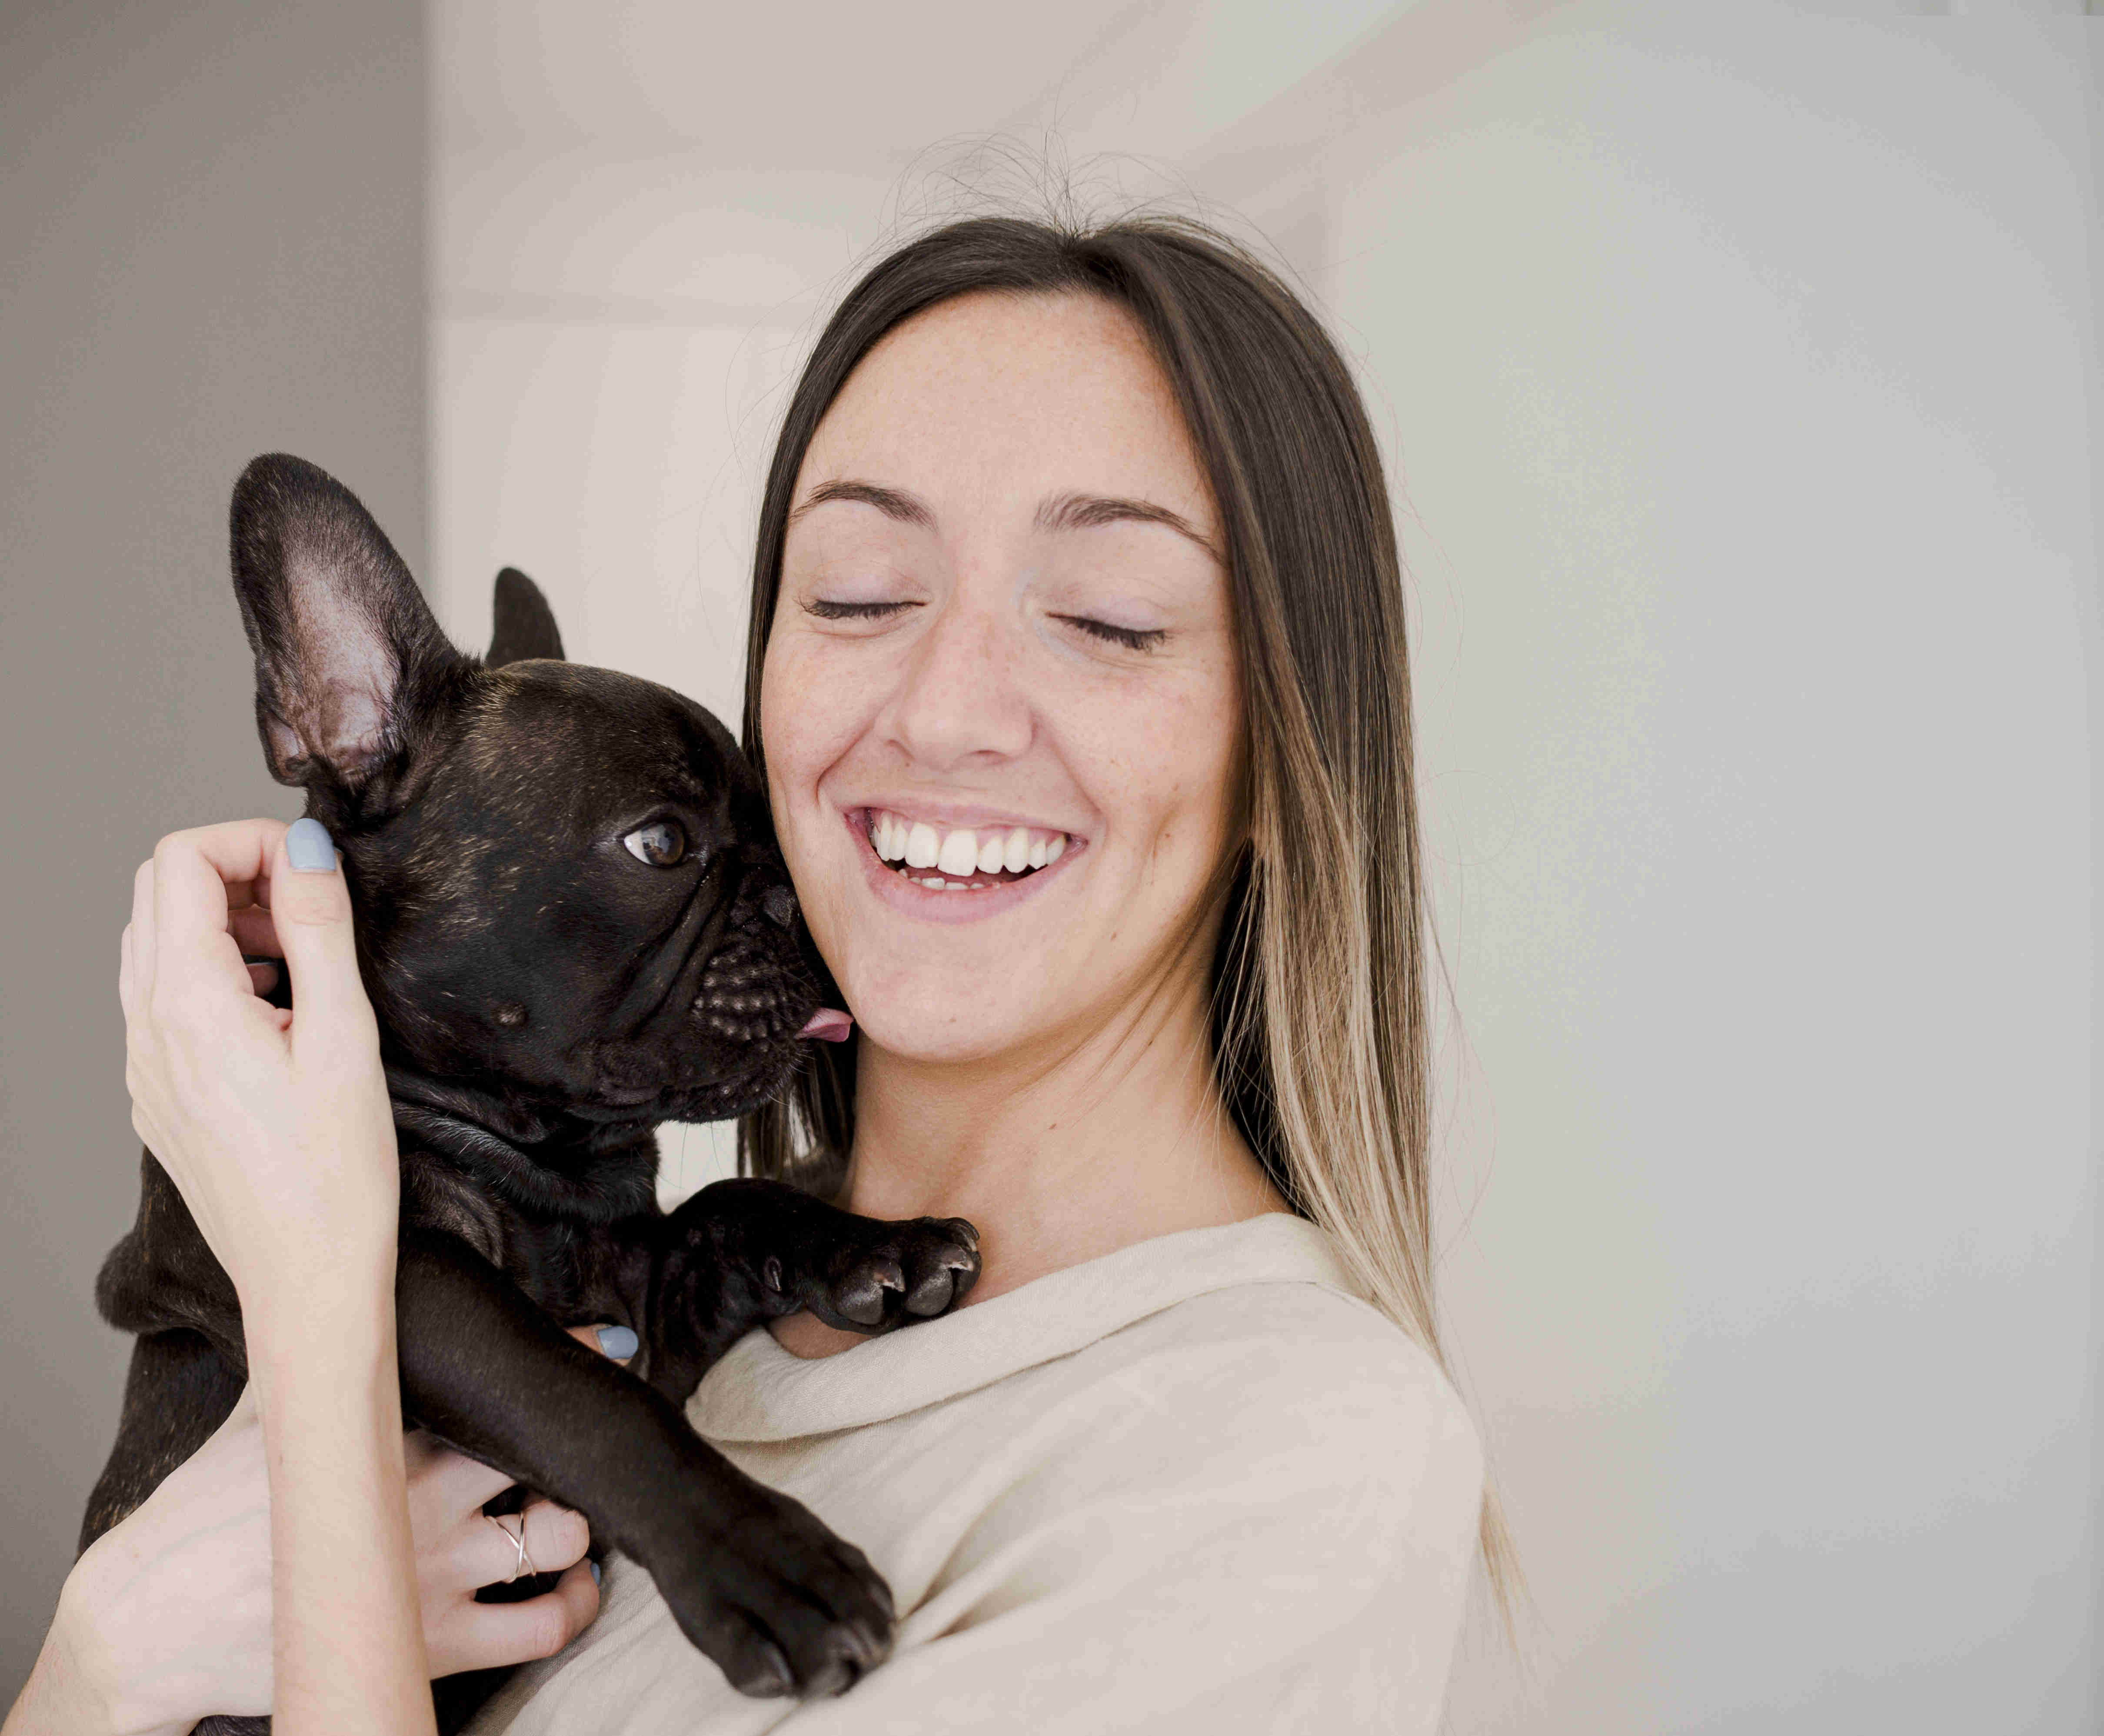 5 Essential Tips for Keeping Your French Bulldog Puppy Cool in Hot Weather